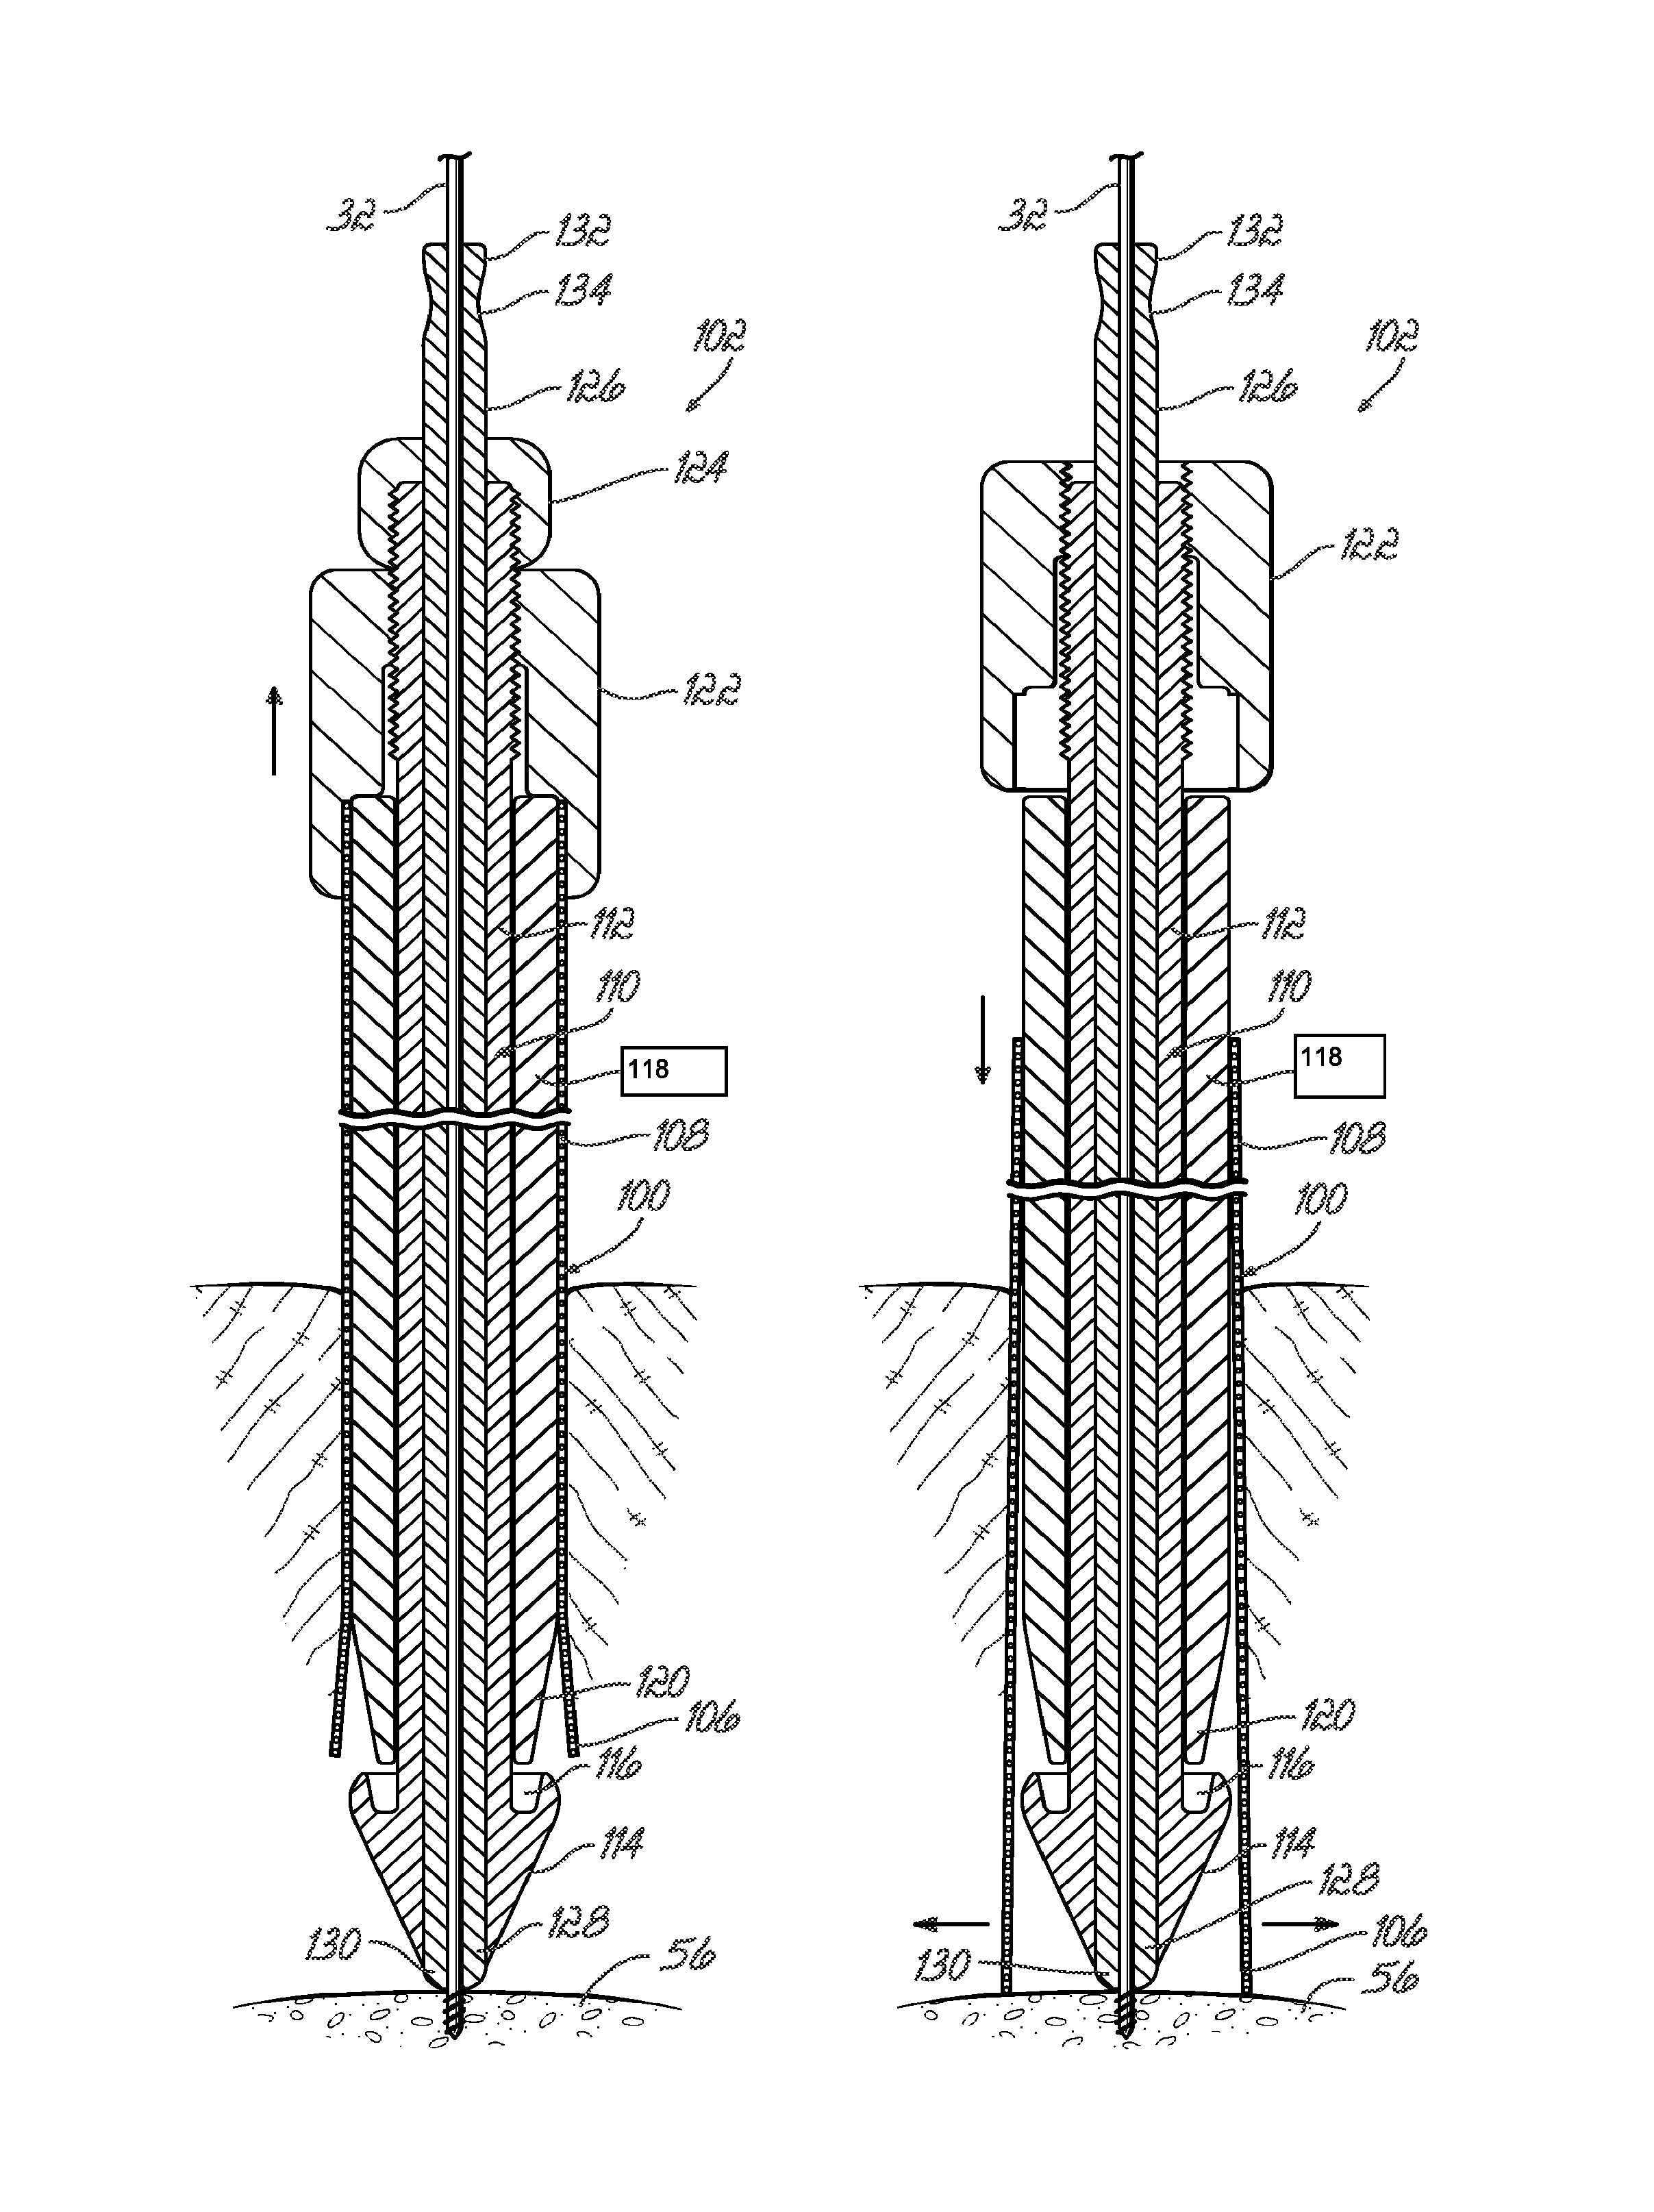 Surgical site access system and deployment device for same